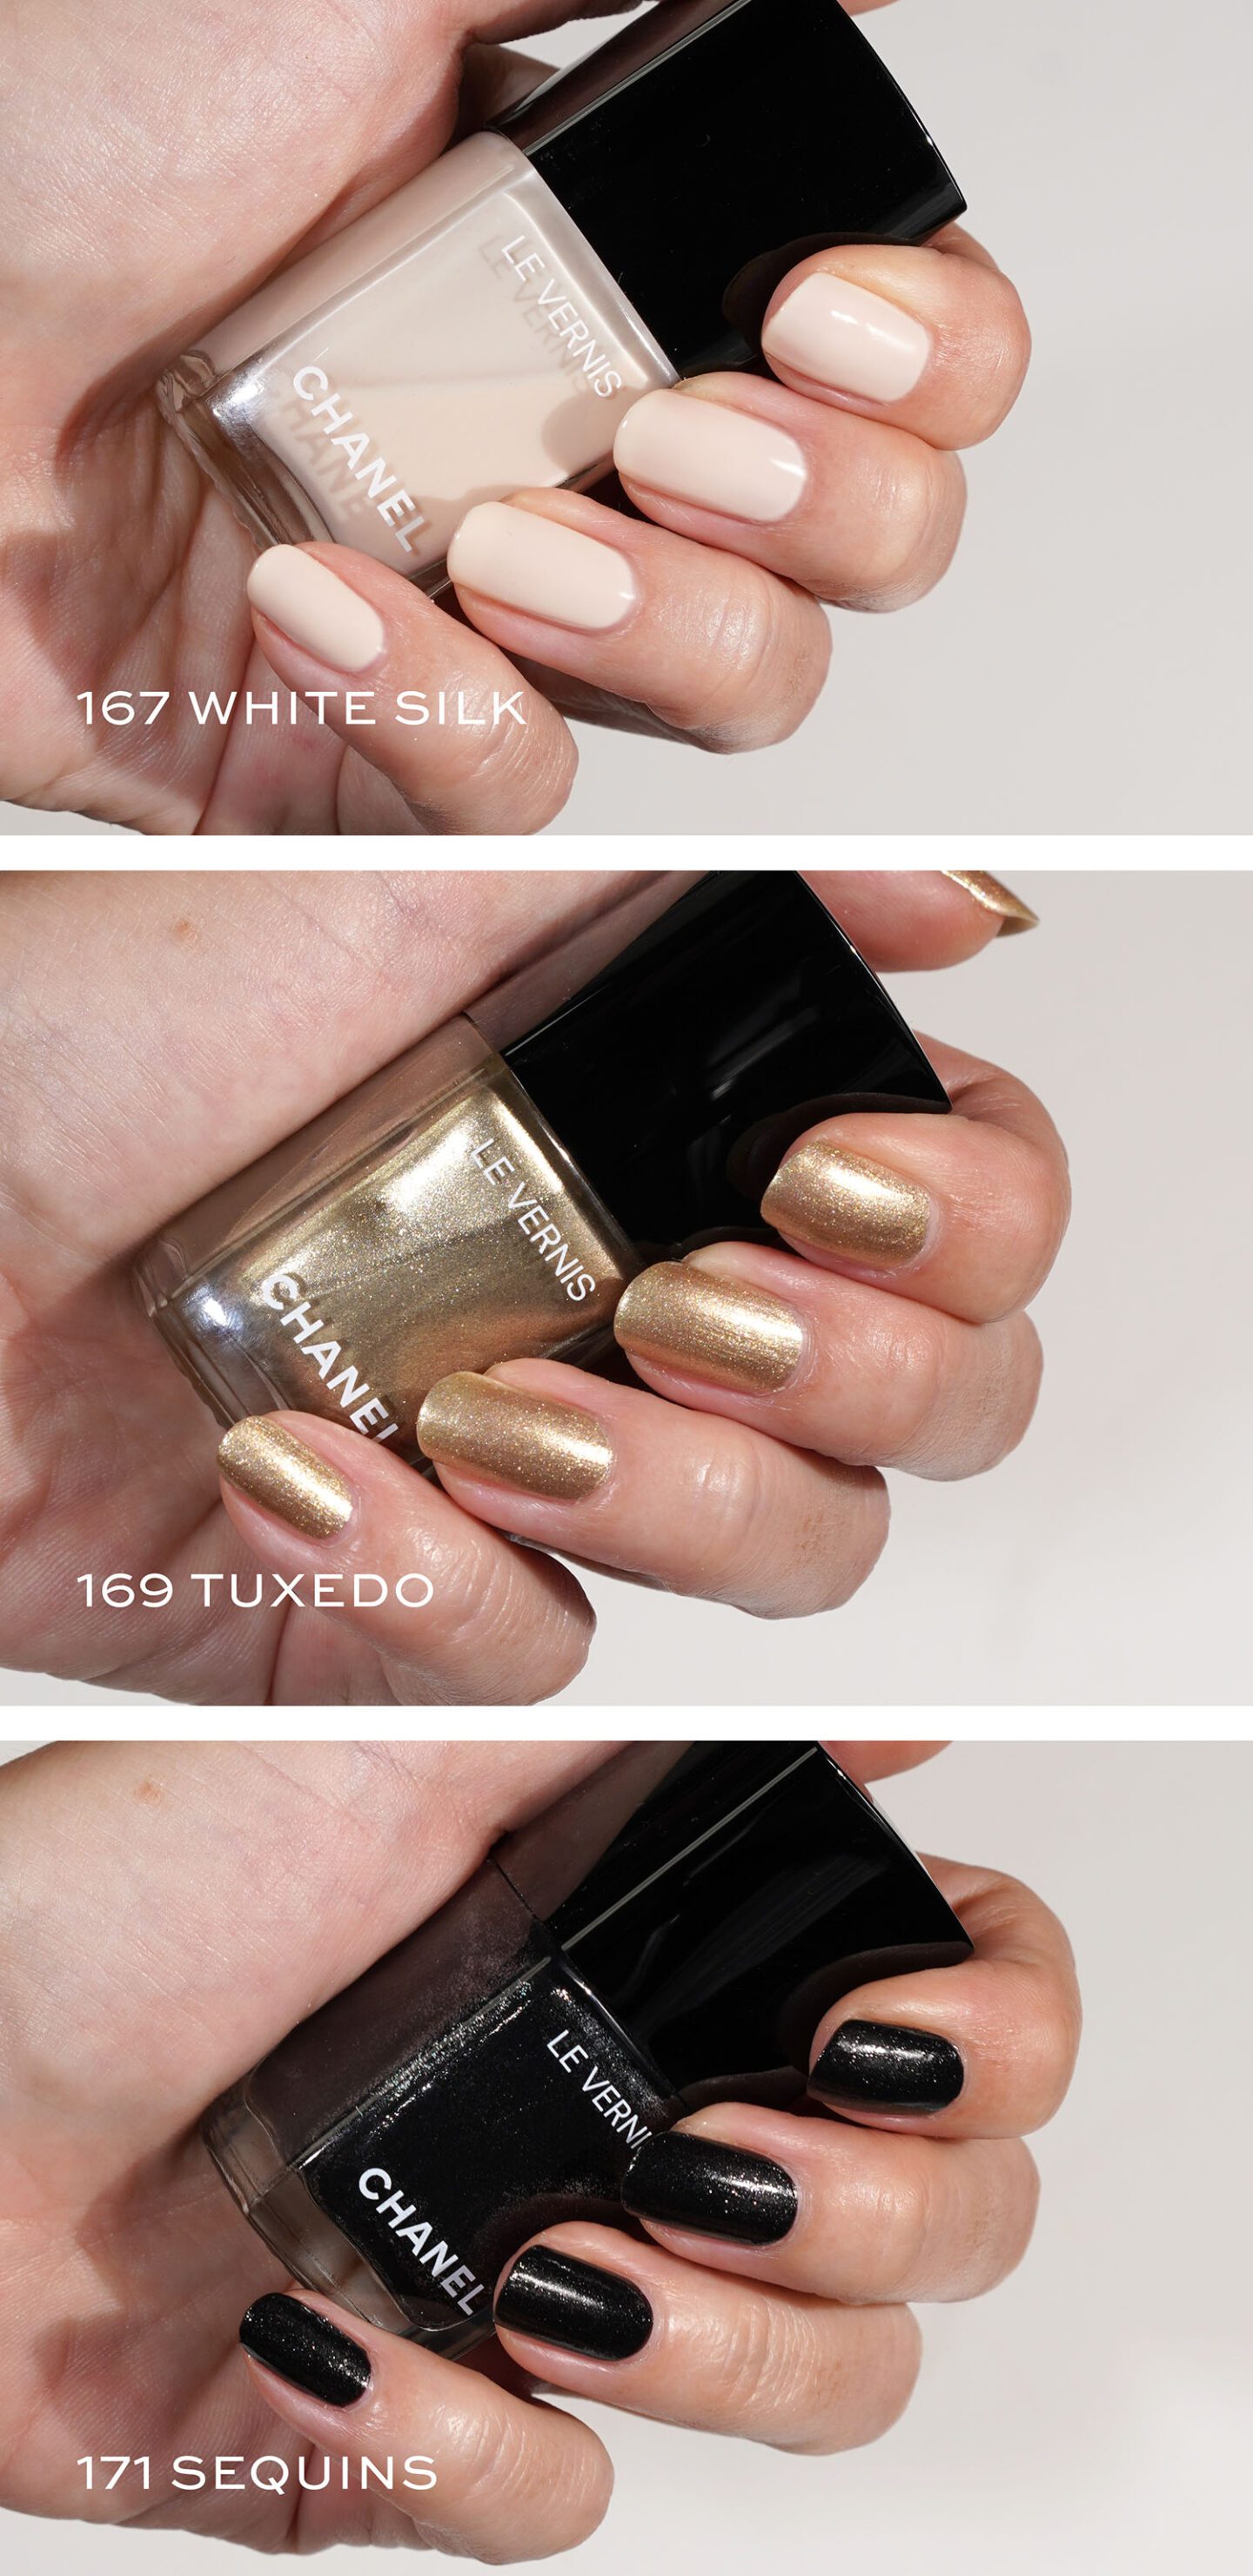 Chanel Holiday Le Vernis 2023 White Silk, Tuxedo and Sequins